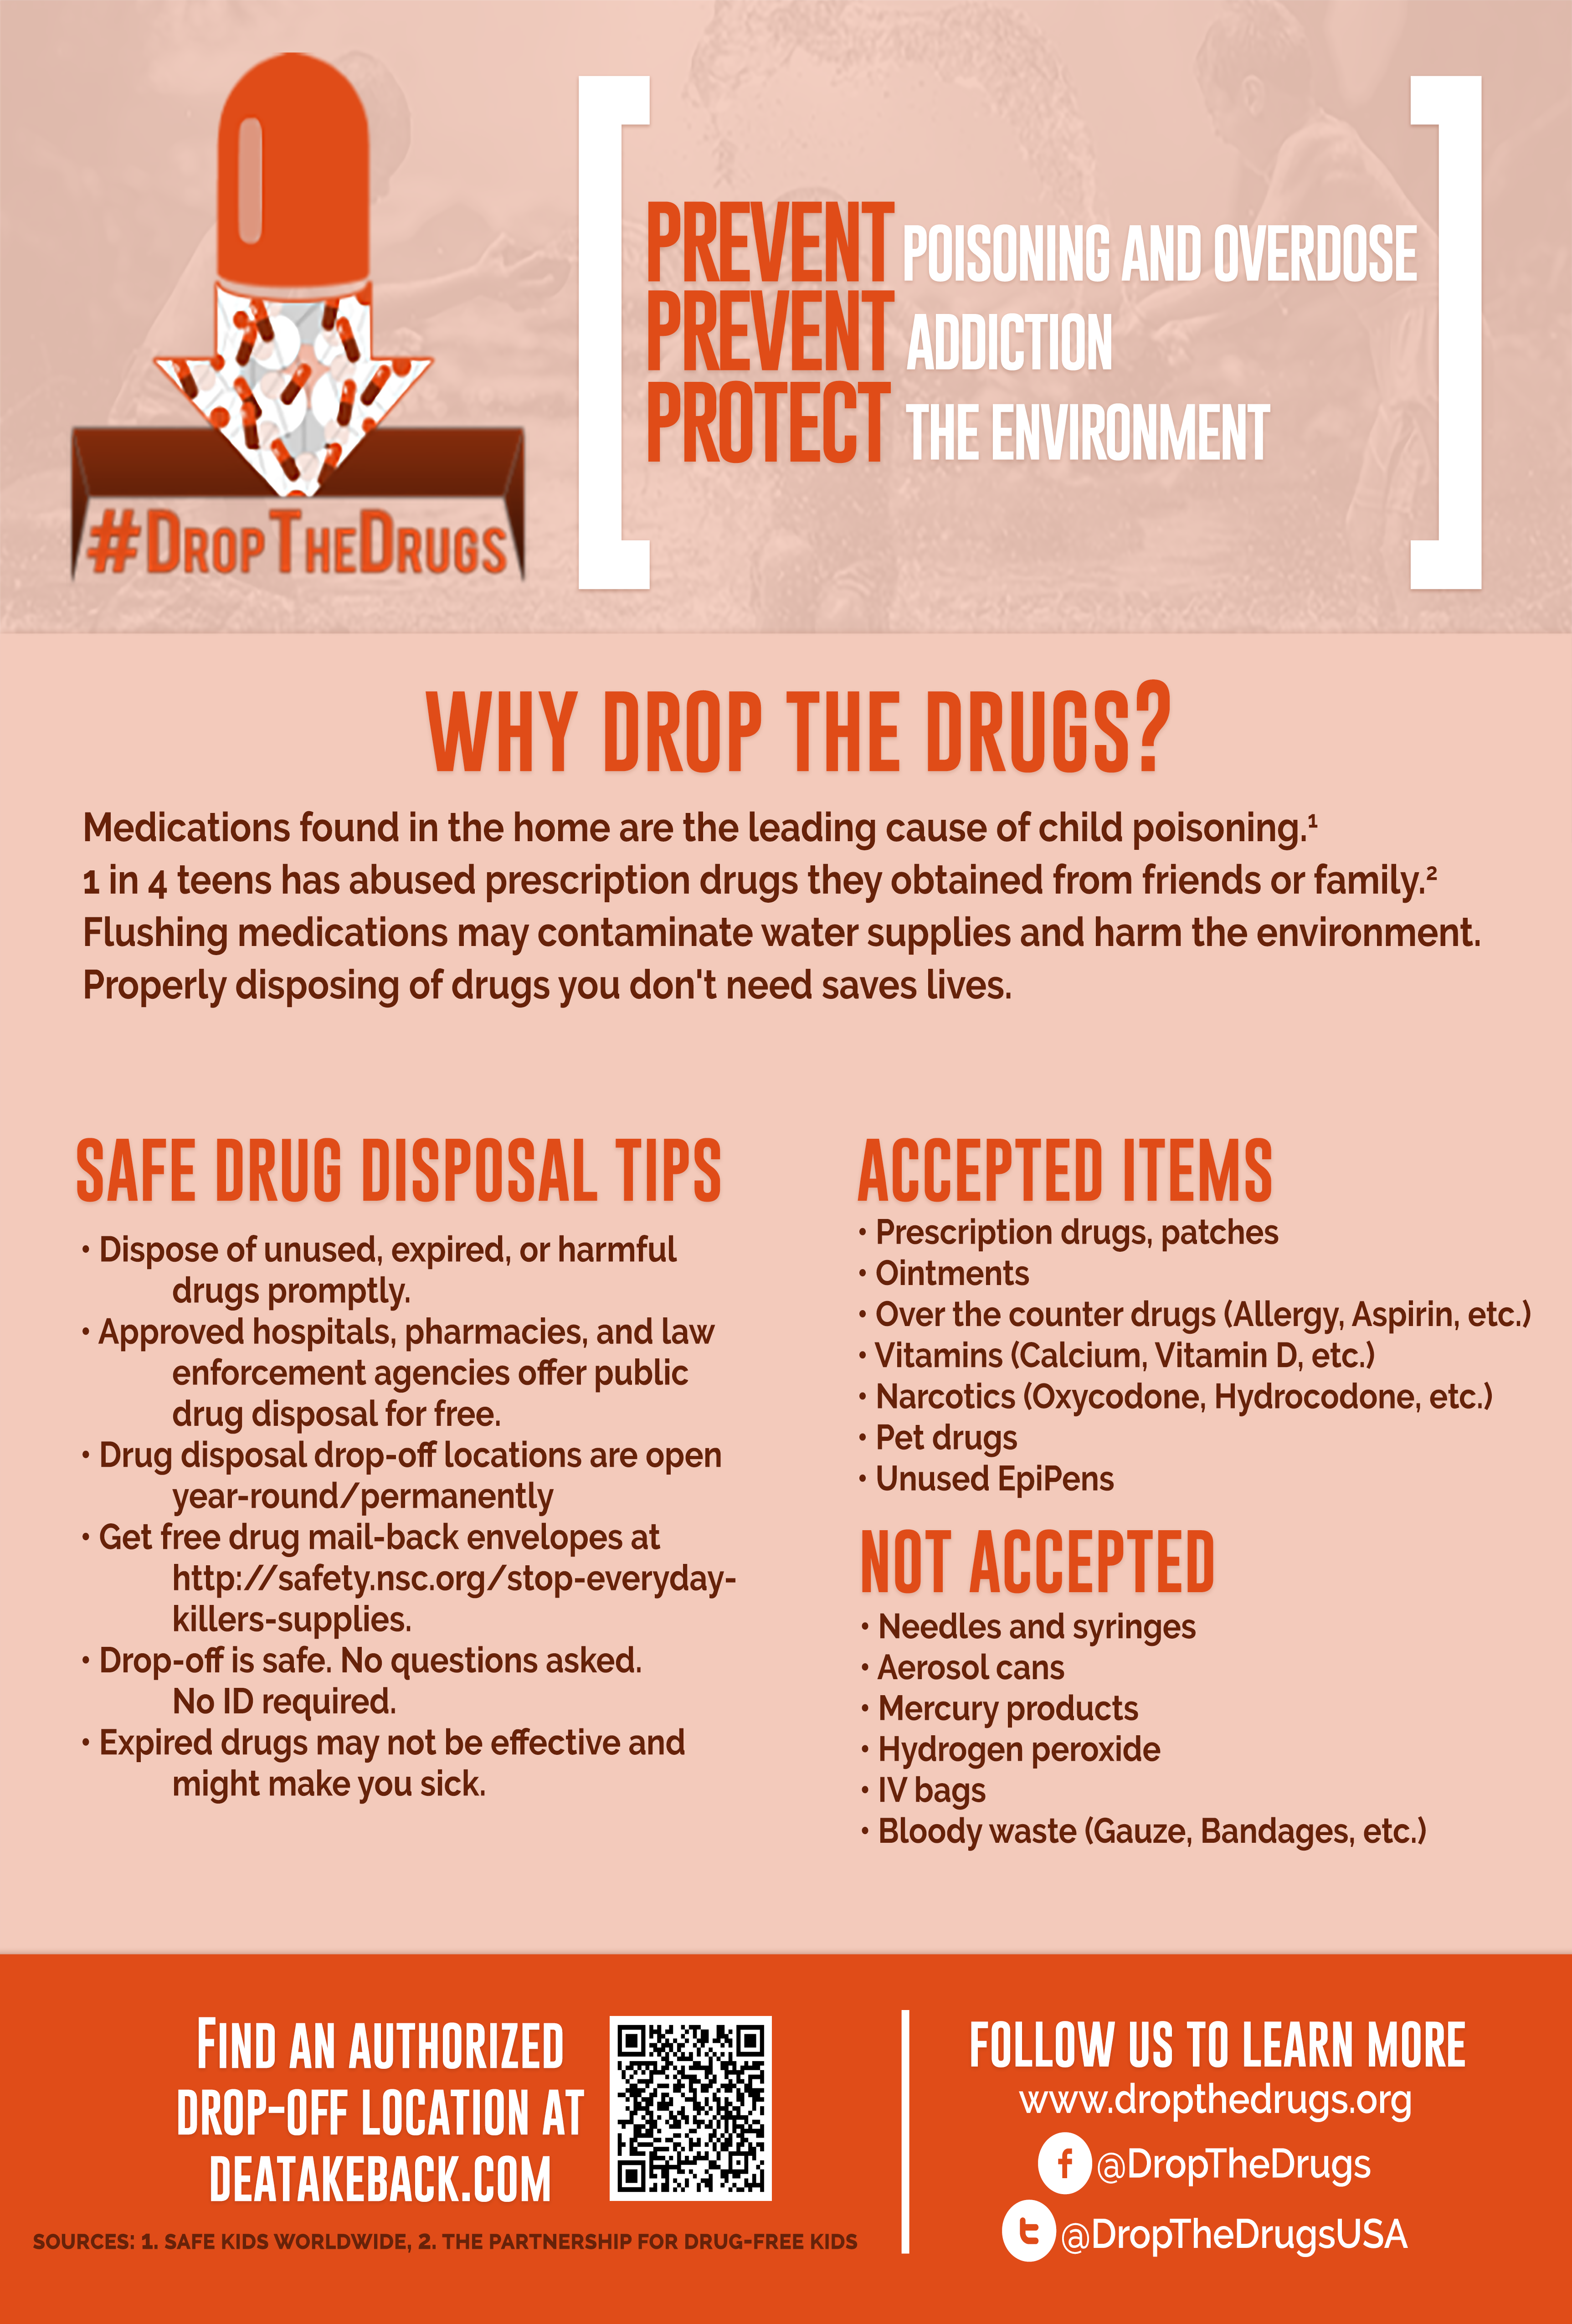 Drop The Drugs Addiction Prevention Tips